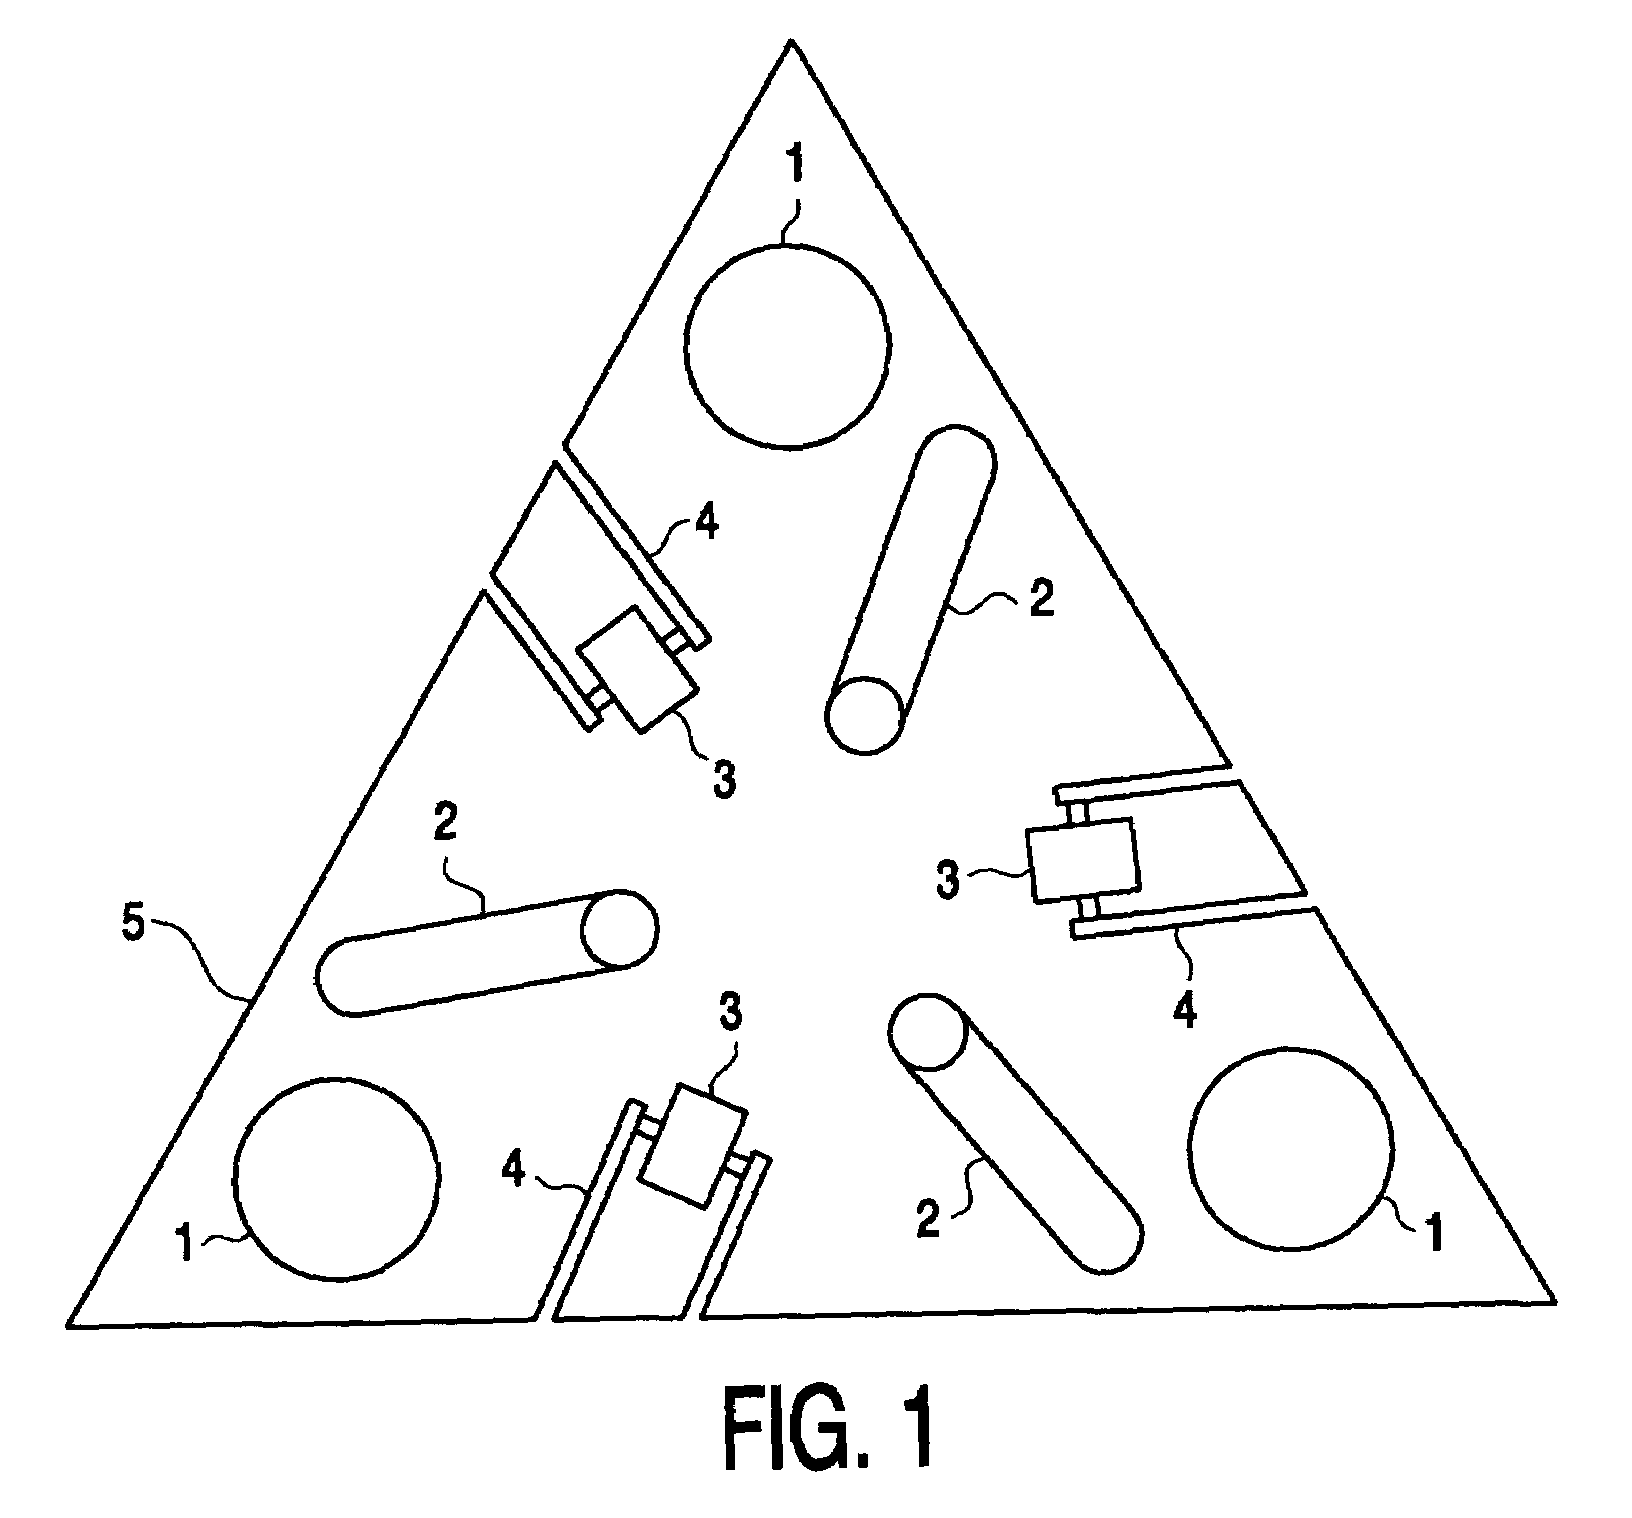 Optical probe for scanning the features of an object and methods therefor